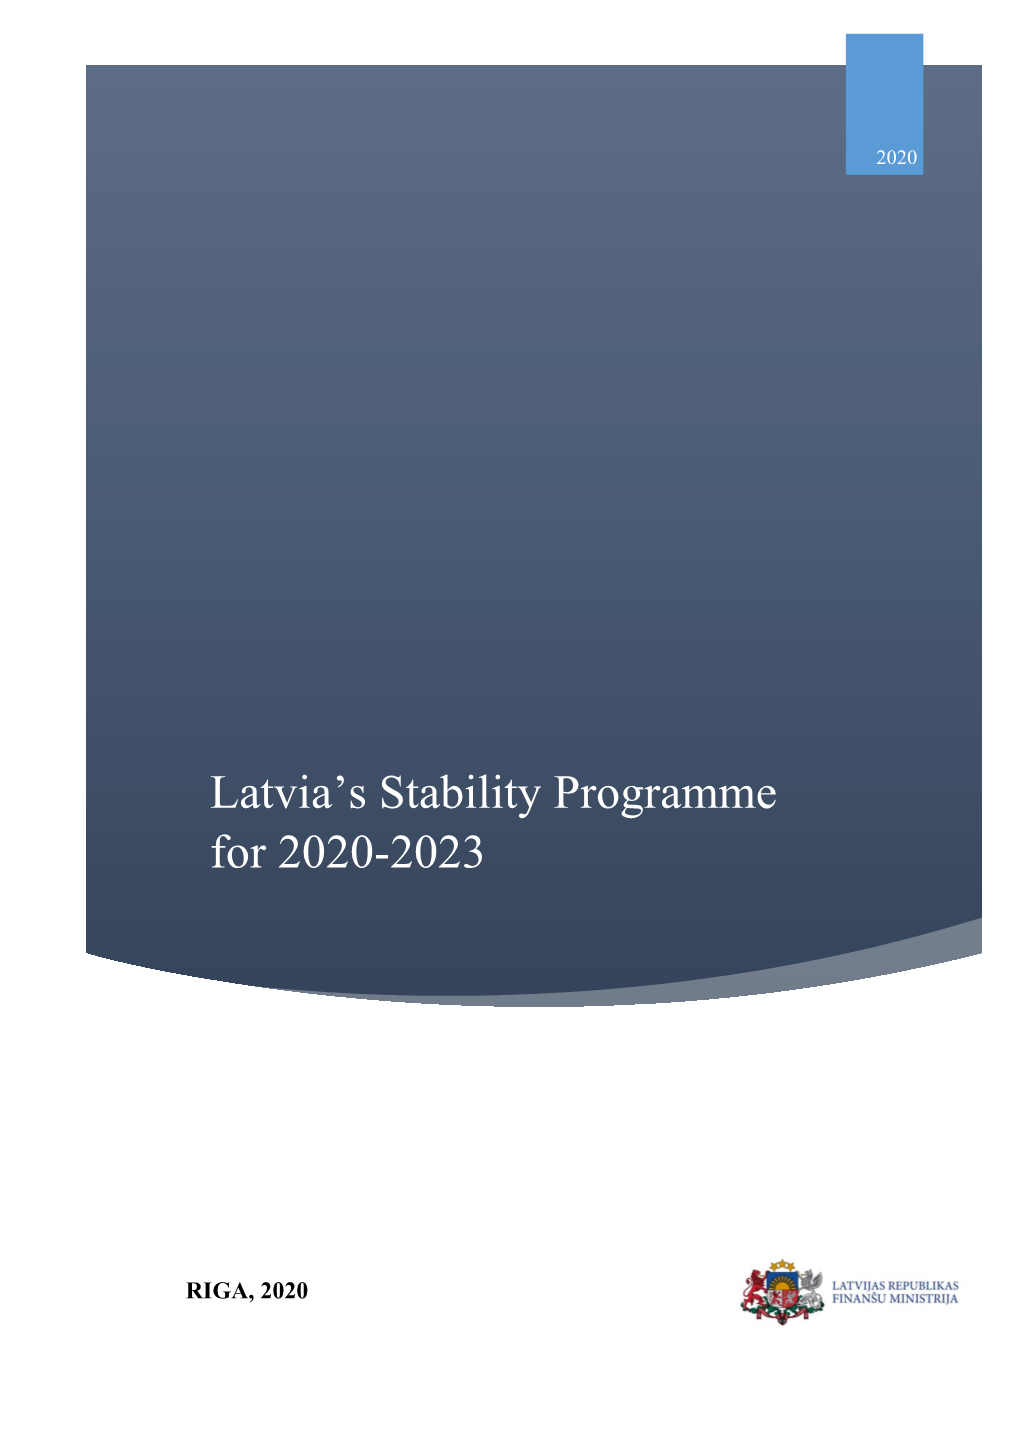 Latvia's Stability Programme for 2020-2023